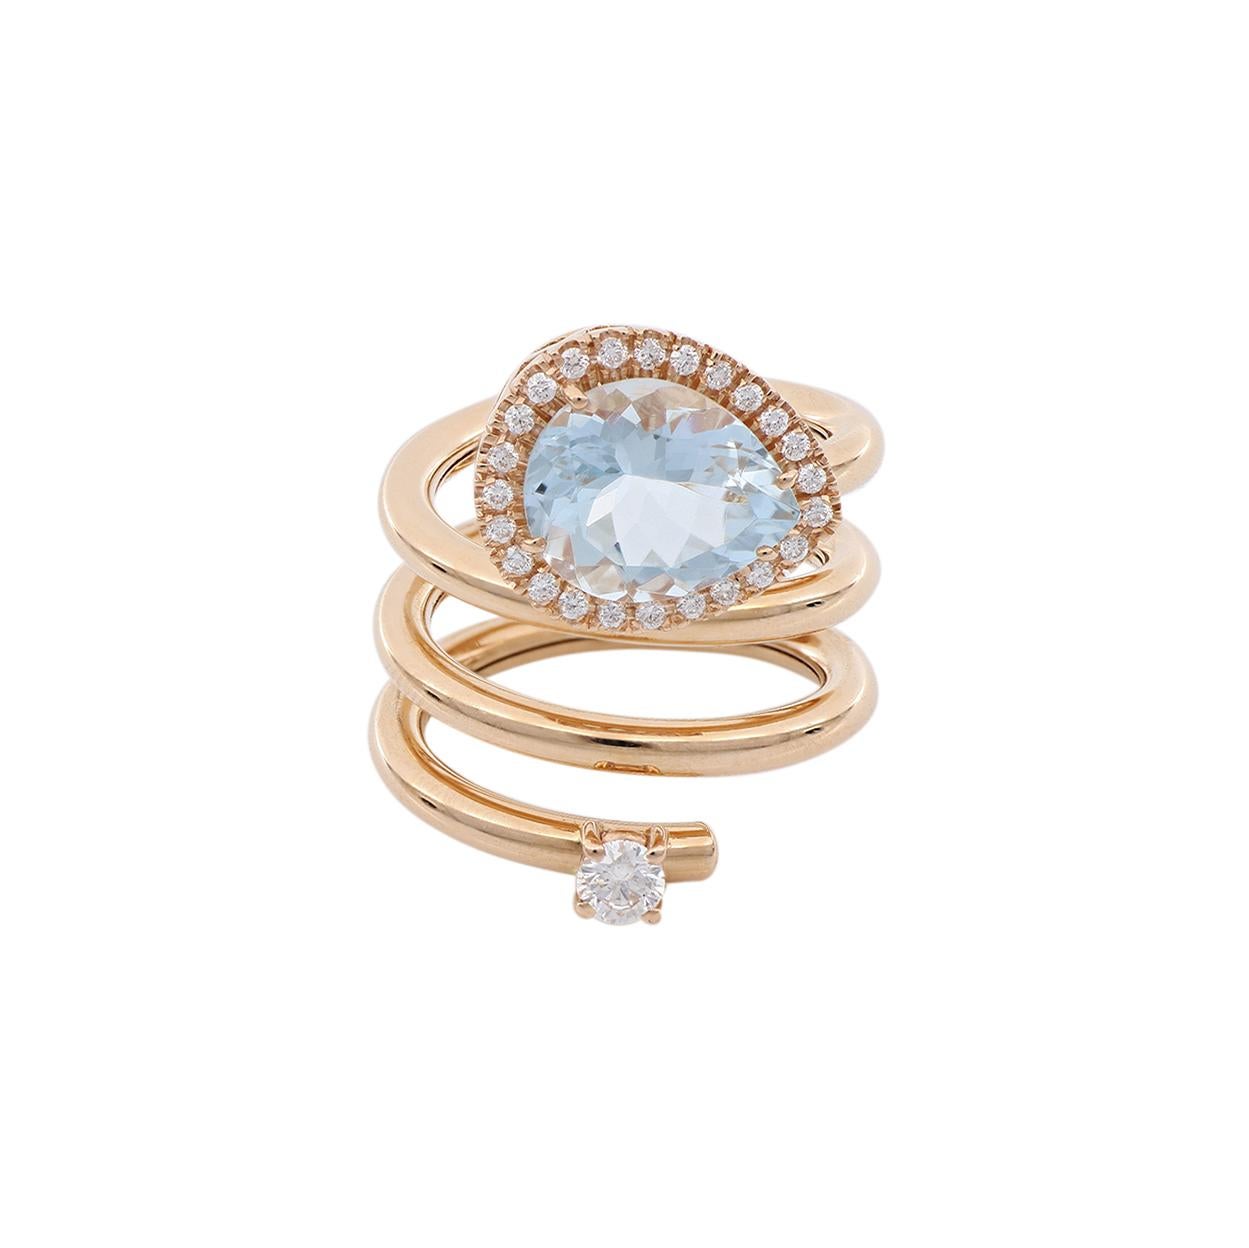 This 18 Kt rose gold spiral ring begins with a diamond accent on one end and culminates in a stunning pear-cut aquamarine with a glistering diamond halo. Being a March birthstone, aquamarine represents the transformation and rebirth of energy and